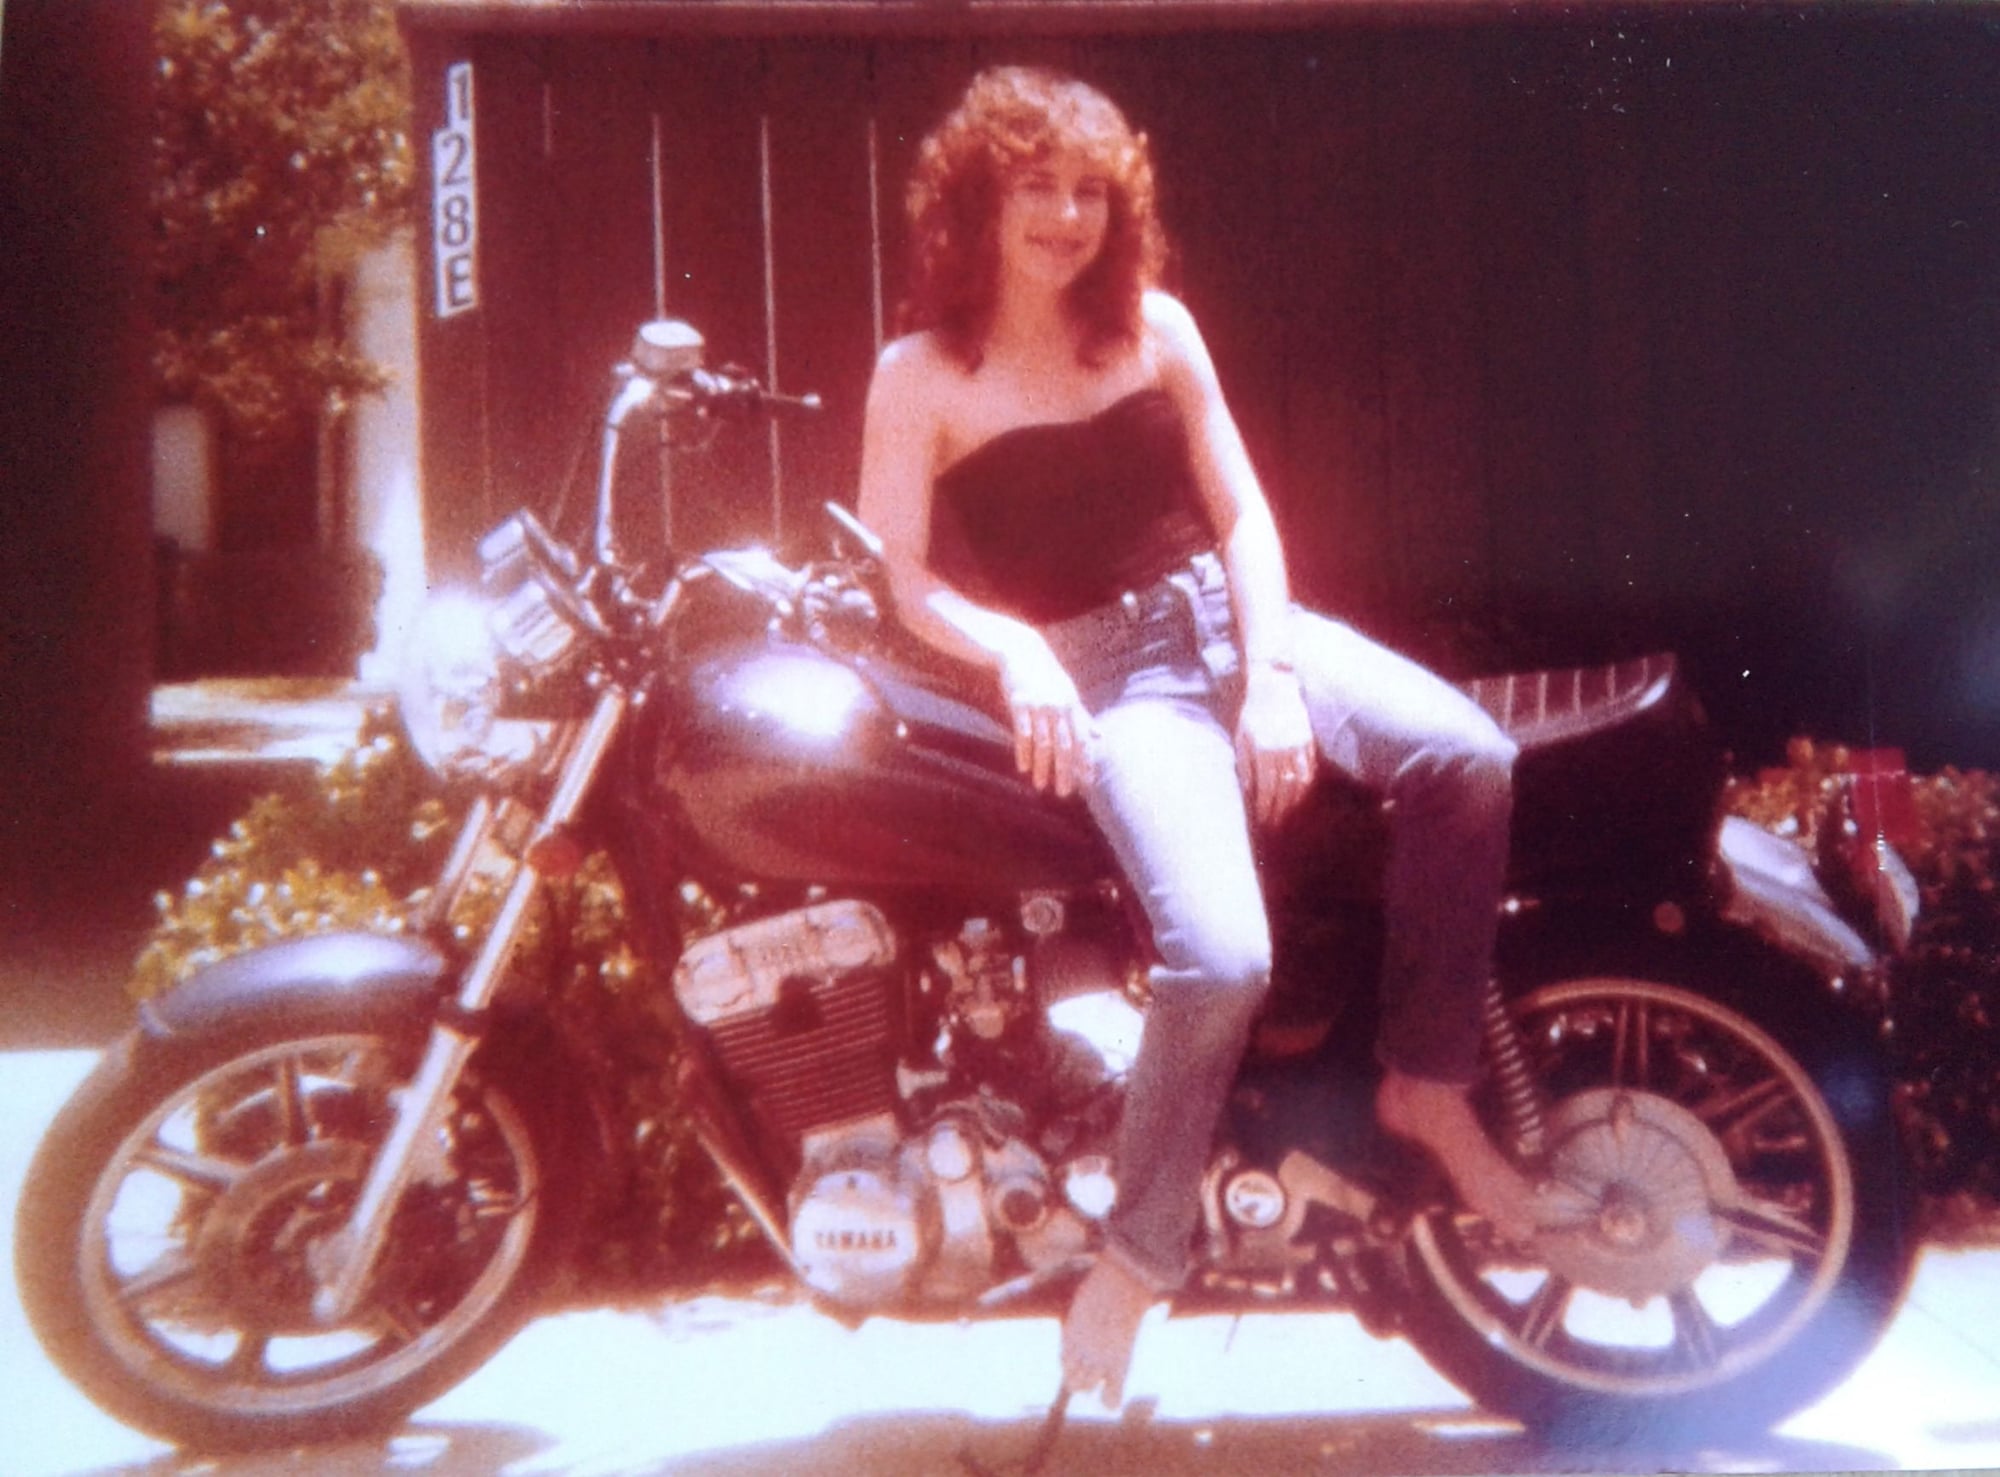 Back in the day . . . got pics? - Page 13 - Harley Davidson Forums